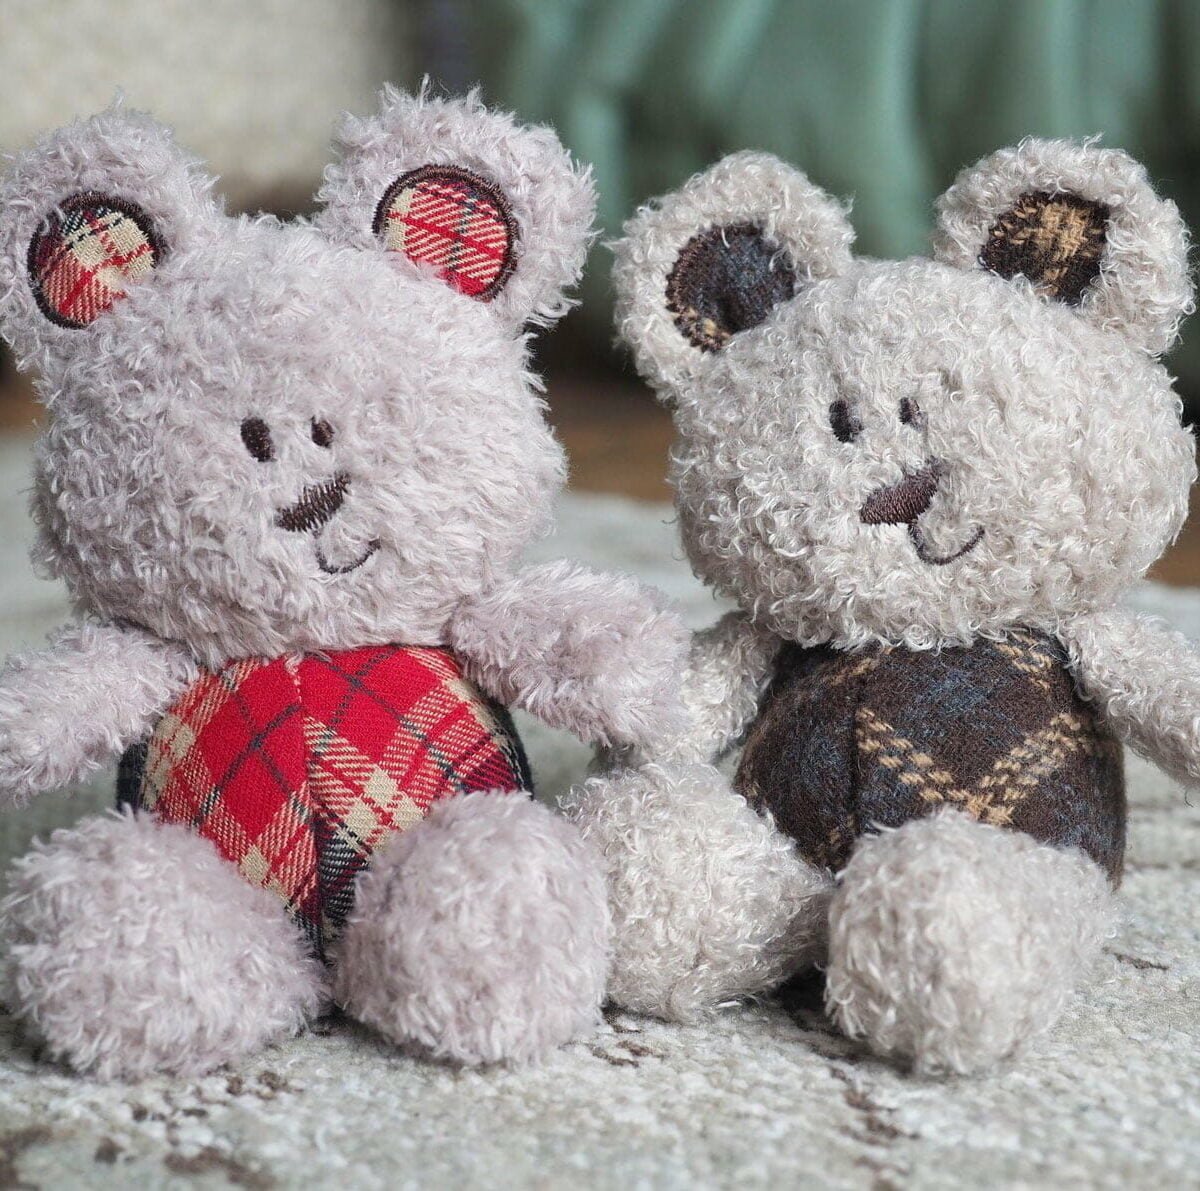 Little Ted and Little Red Bears sitting together on a rug